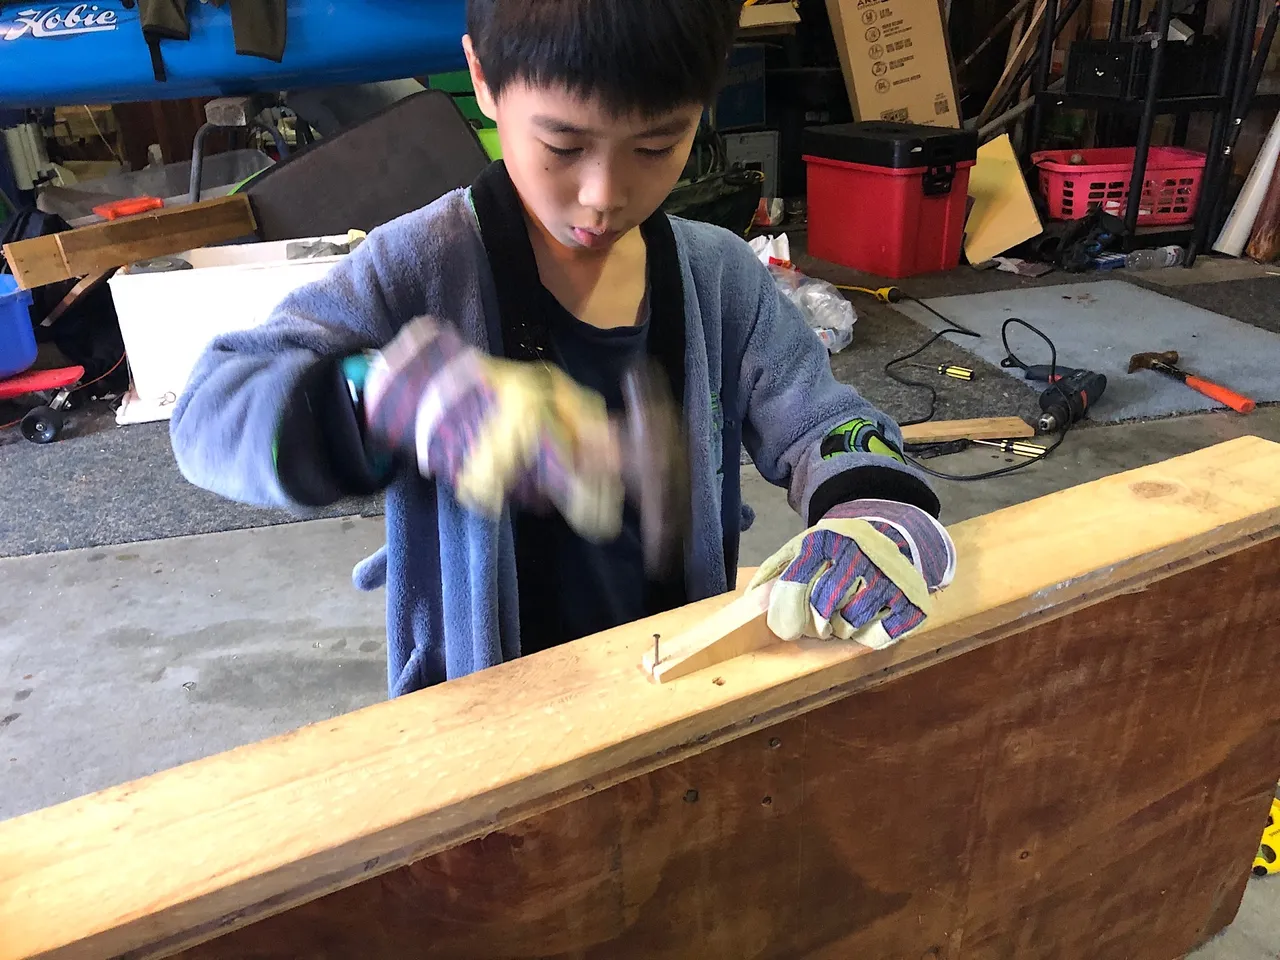 Thien-San is hammering a board to build his workbench